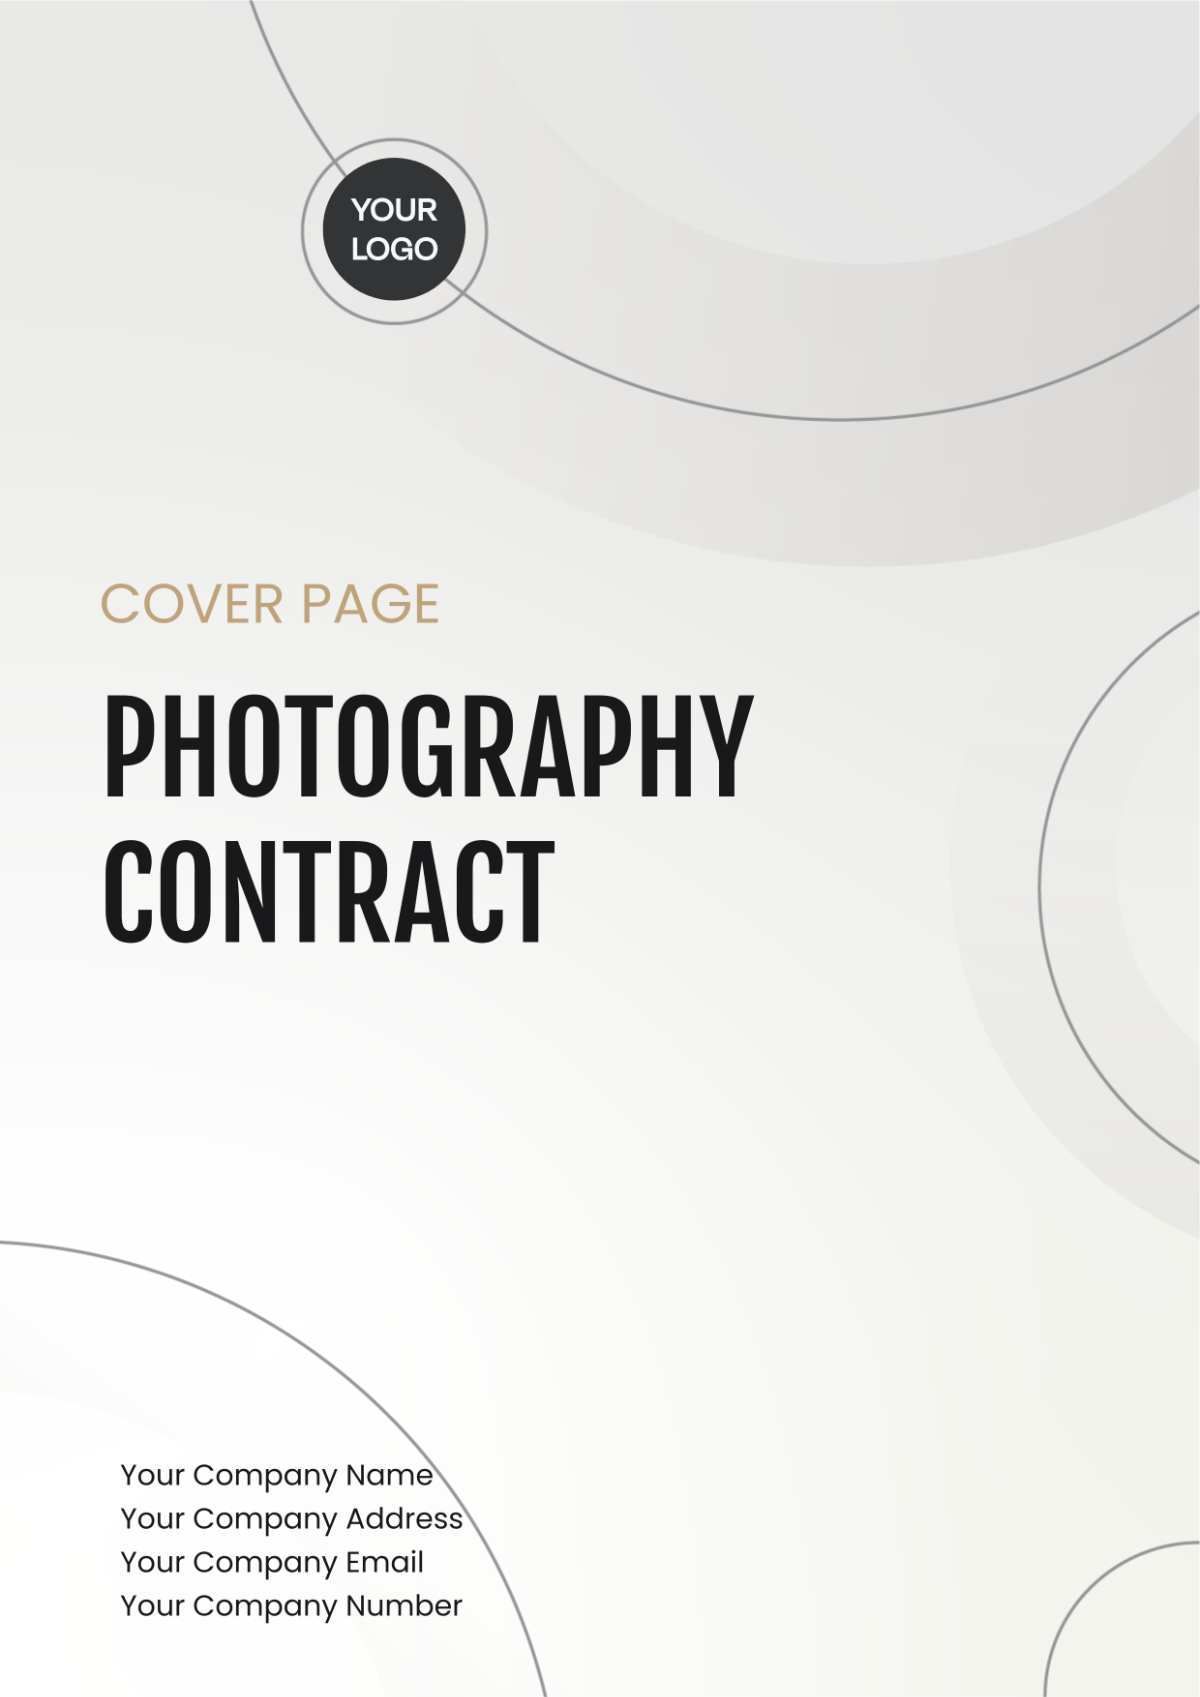 Photography Contract Cover Page